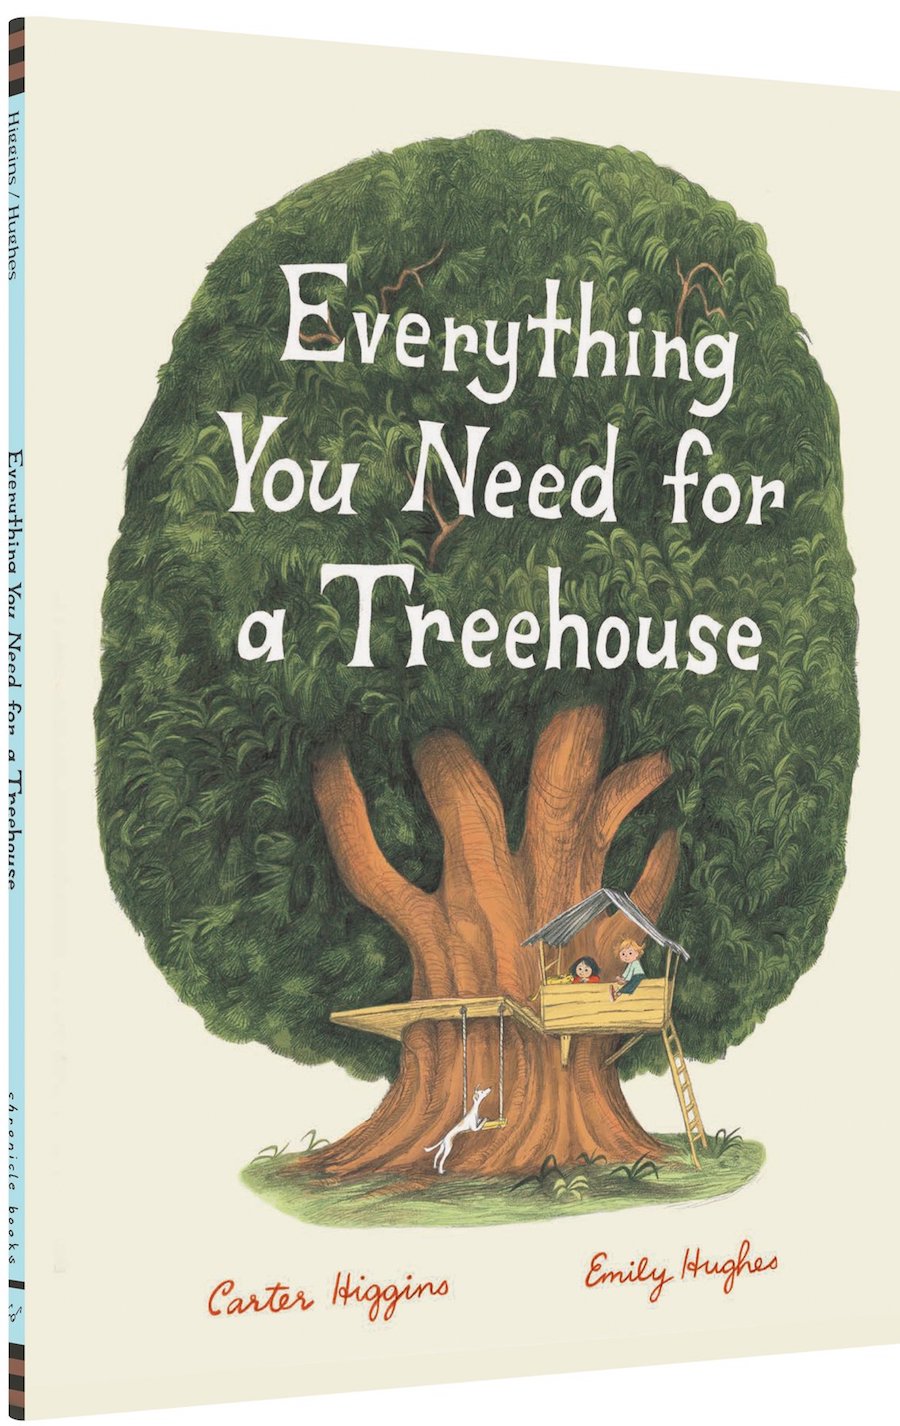 Great books about the environment for kids: Everything You Need for a Treehouse by Carter Higgins and Emily Hughes